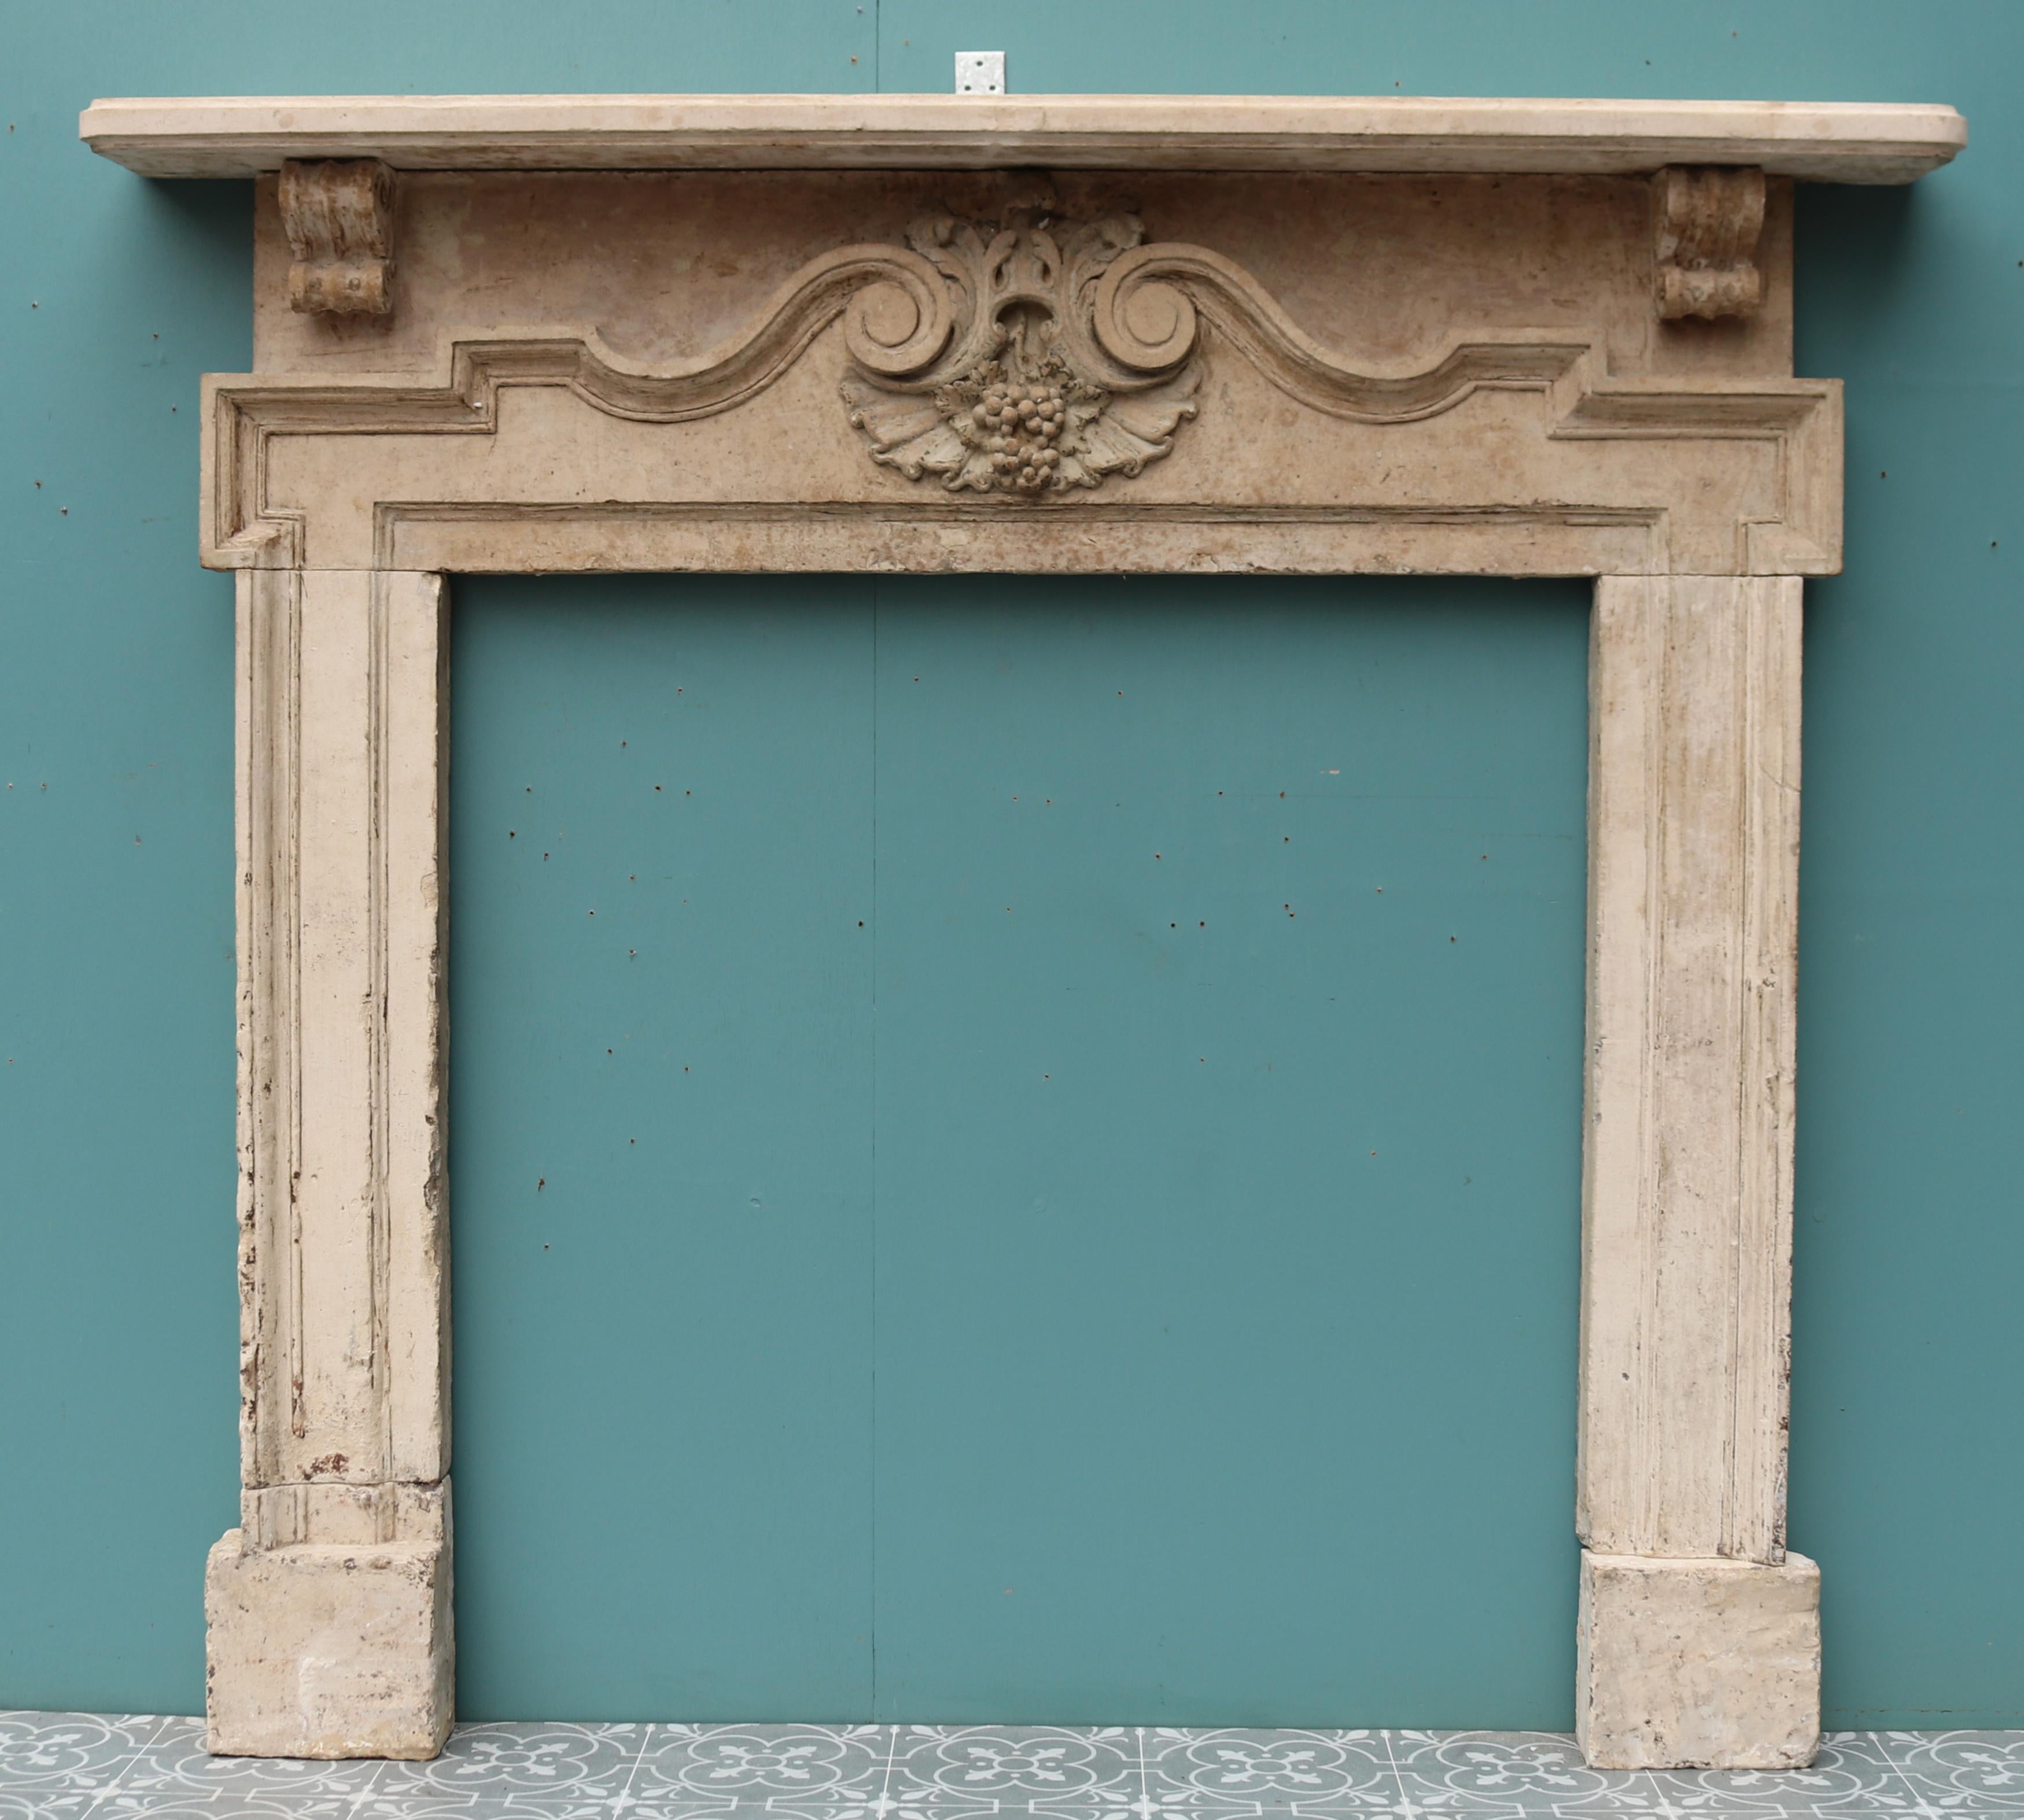 A mid-18th century Painswick Stone chimneypiece in the Palladian style.

Additional Dimensions:
Opening height 94.5 cm

Opening width 92 cm

Width between outside of the foot blocks 128.5 cm.